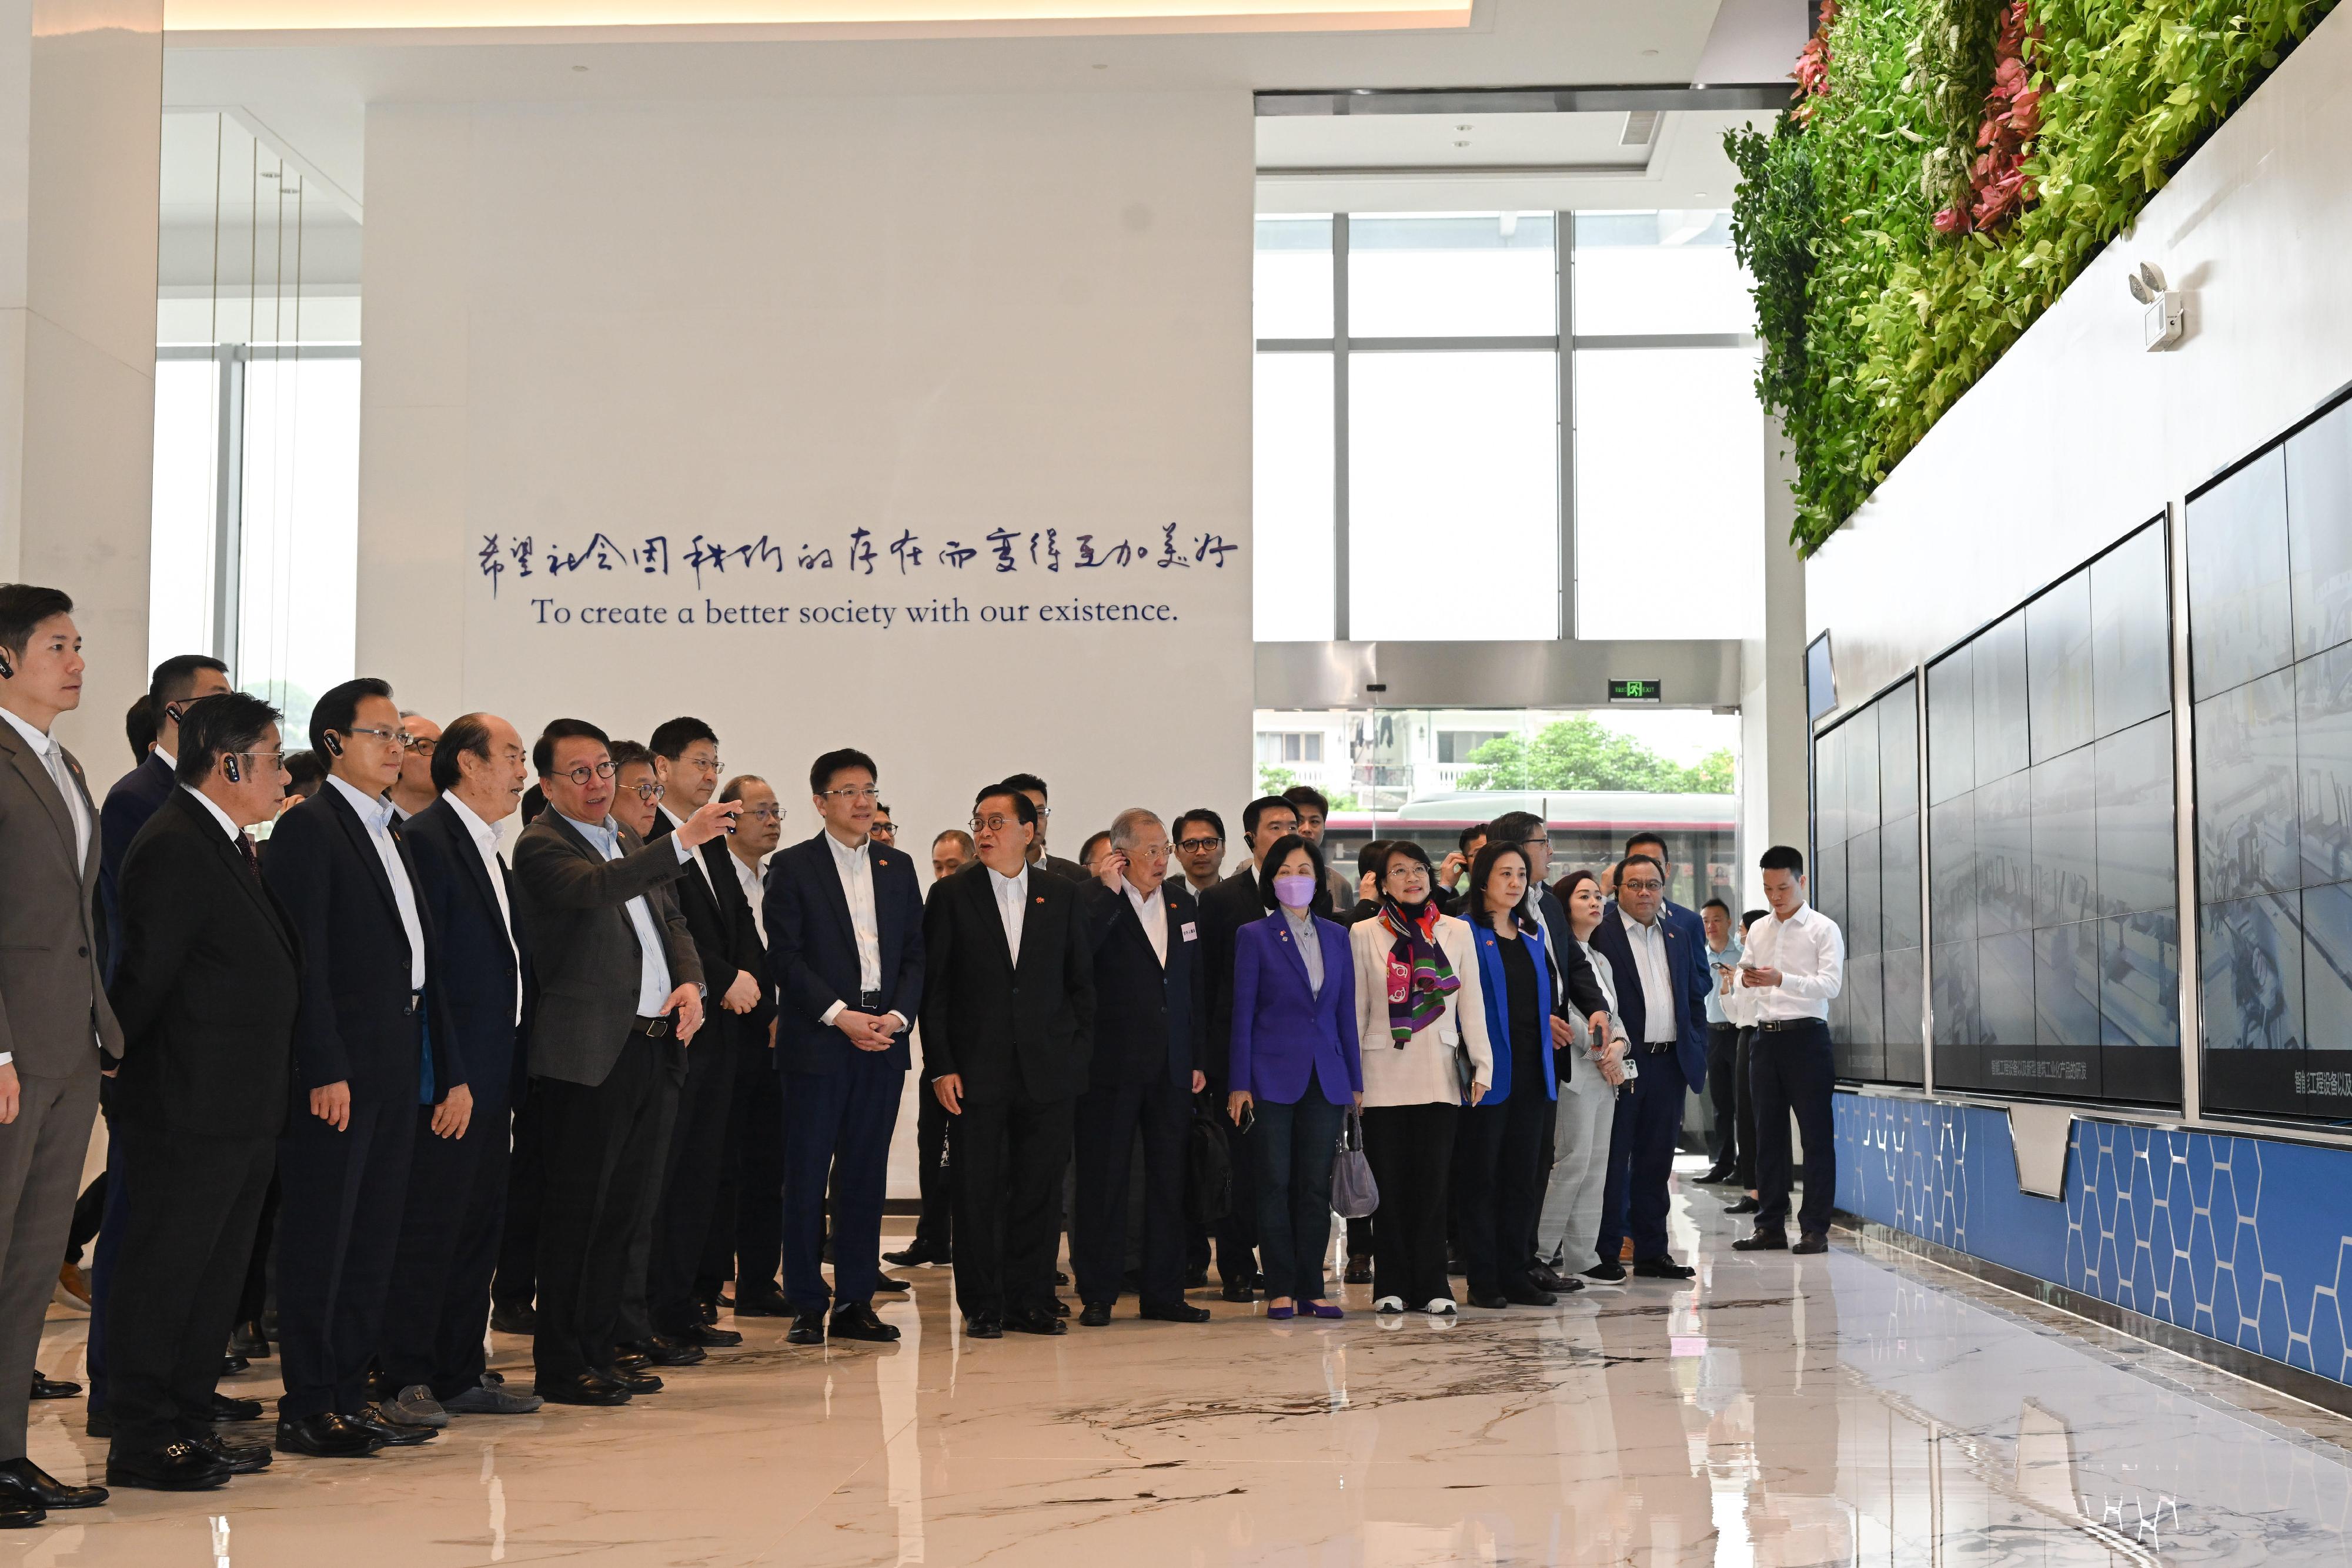 The delegation of the Hong Kong Special Administrative Region Government and the Legislative Council (LegCo) led by the Chief Executive, Mr John Lee, conducted their third-day visit in the Guangdong-Hong Kong-Macao Greater Bay Area today (April 23). Photo shows the Chief Secretary for Administration, Mr Chan Kwok-ki (front row, fifth left); the founder of the Country Garden Group, Mr Yang Guoqiang (front row, fourth left); the Secretary for Commerce and Economic Development, Mr Algernon Yau (front row, sixth left); the Secretary for Innovation, Technology and Industry, Professor Sun Dong (front row, eighth left); and LegCo members visiting the Guangdong Bright Dream Robotics Co Ltd in Foshan.